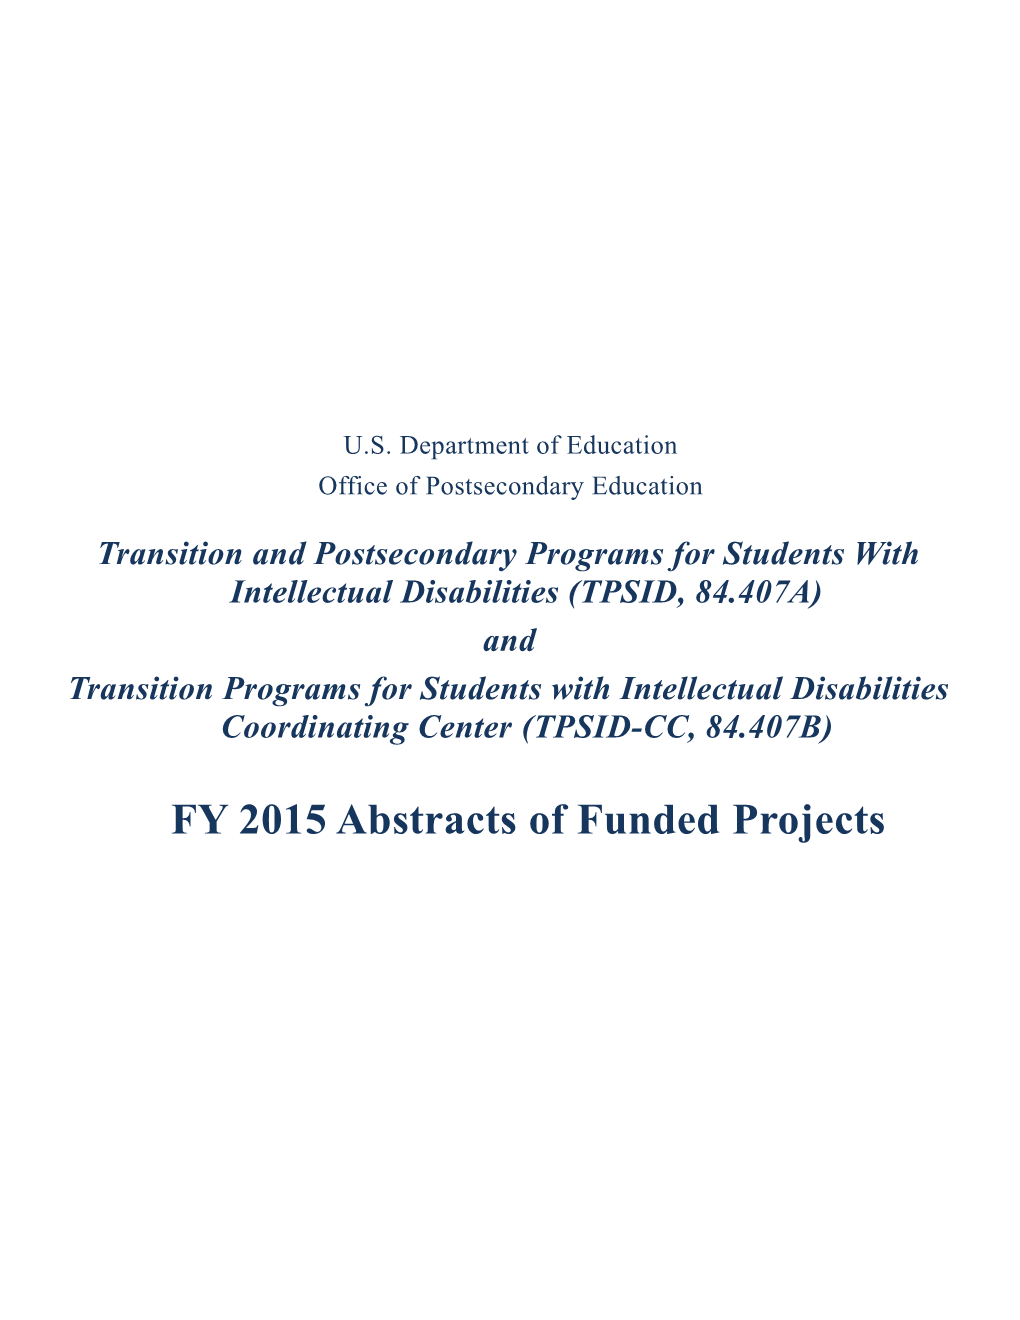 FY 2015 Abstracts of Funded Projects Under the TPSID and the TPSID-CC Programs (MS Word)